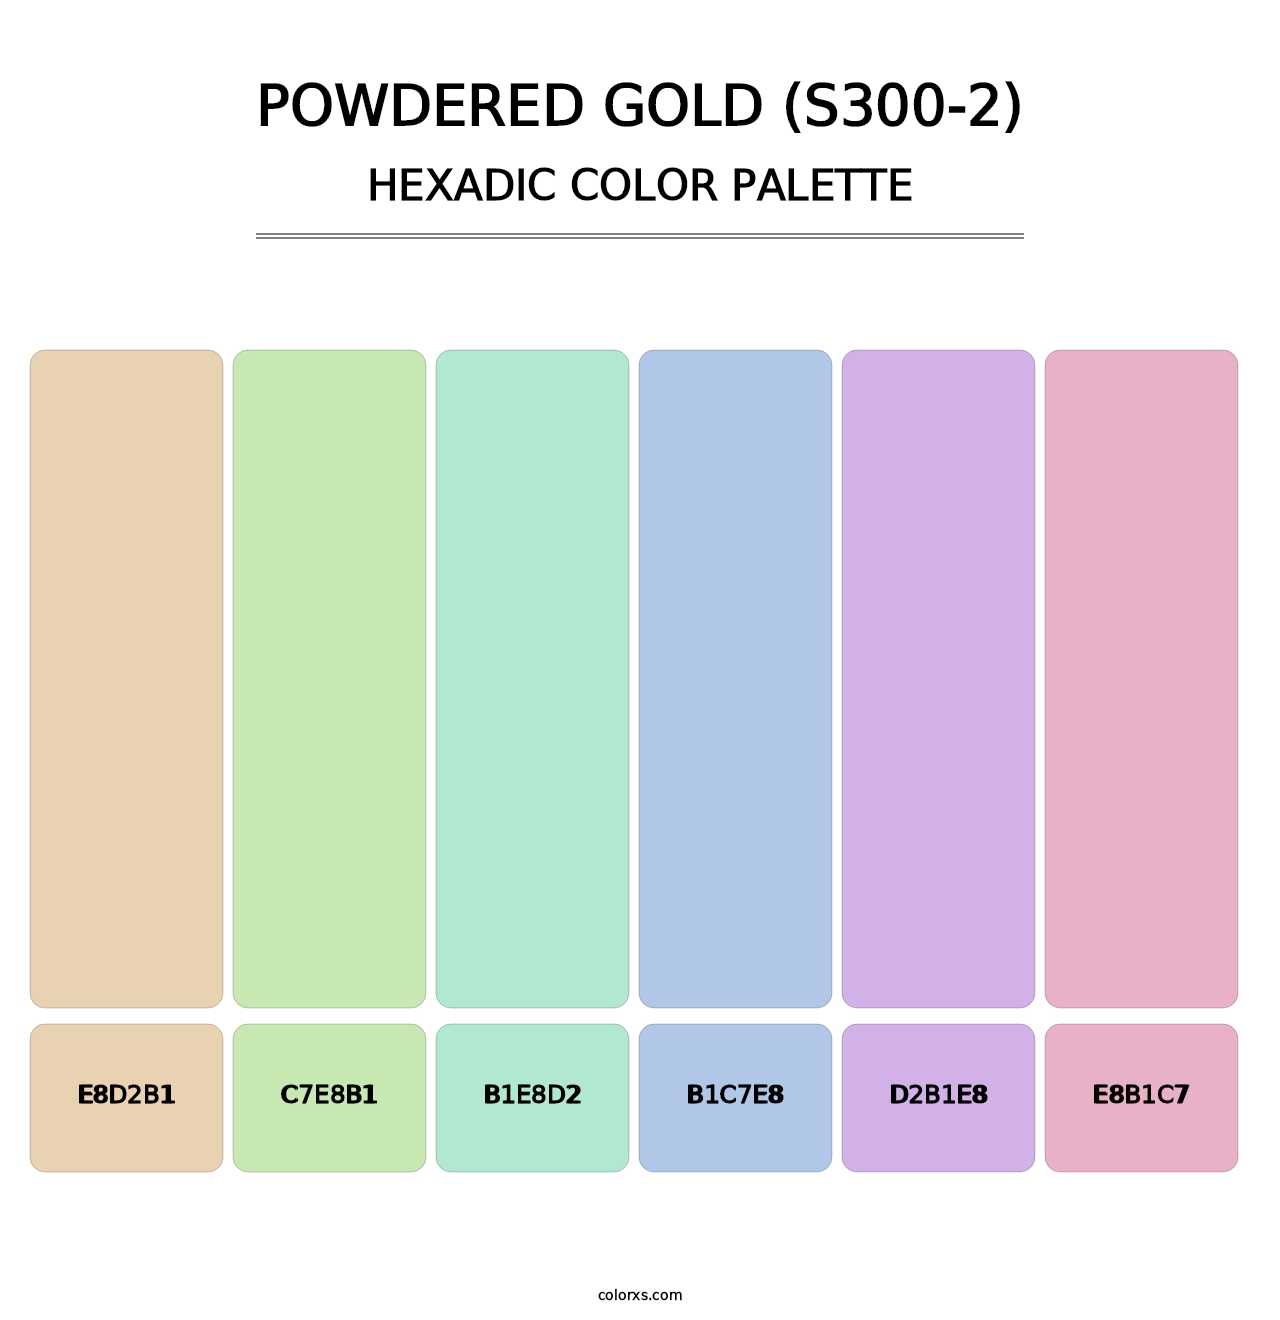 Powdered Gold (S300-2) - Hexadic Color Palette